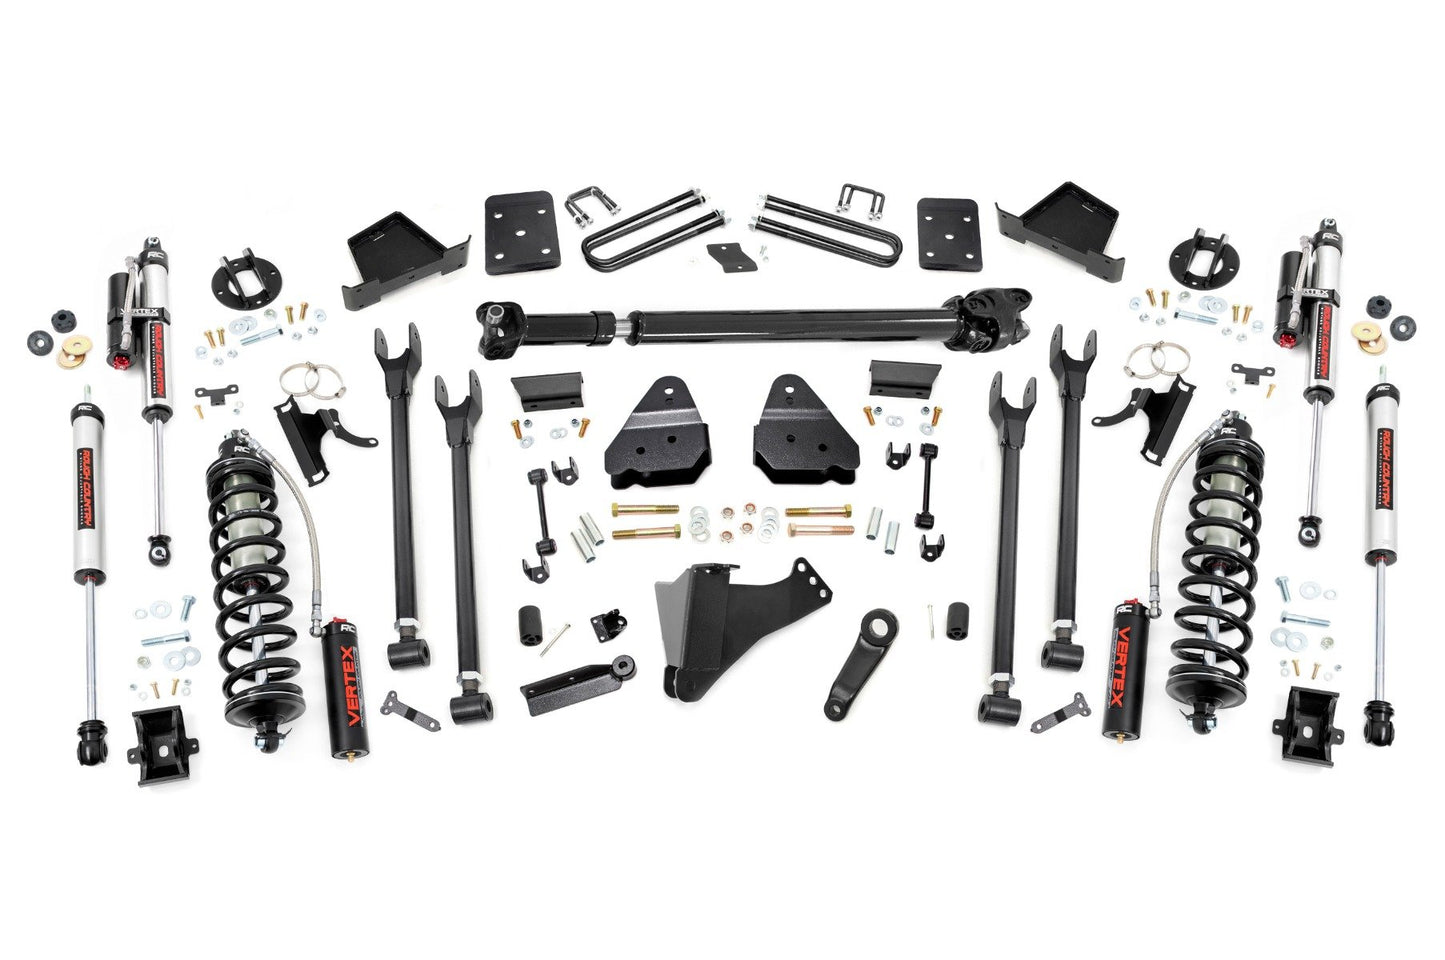 Rough Country 6 Inch Lift Kit  |  Diesel  |  4 Link  |  D/S  |  C/O Vertex | Ford F-250/F-350 Super Duty (17-22)